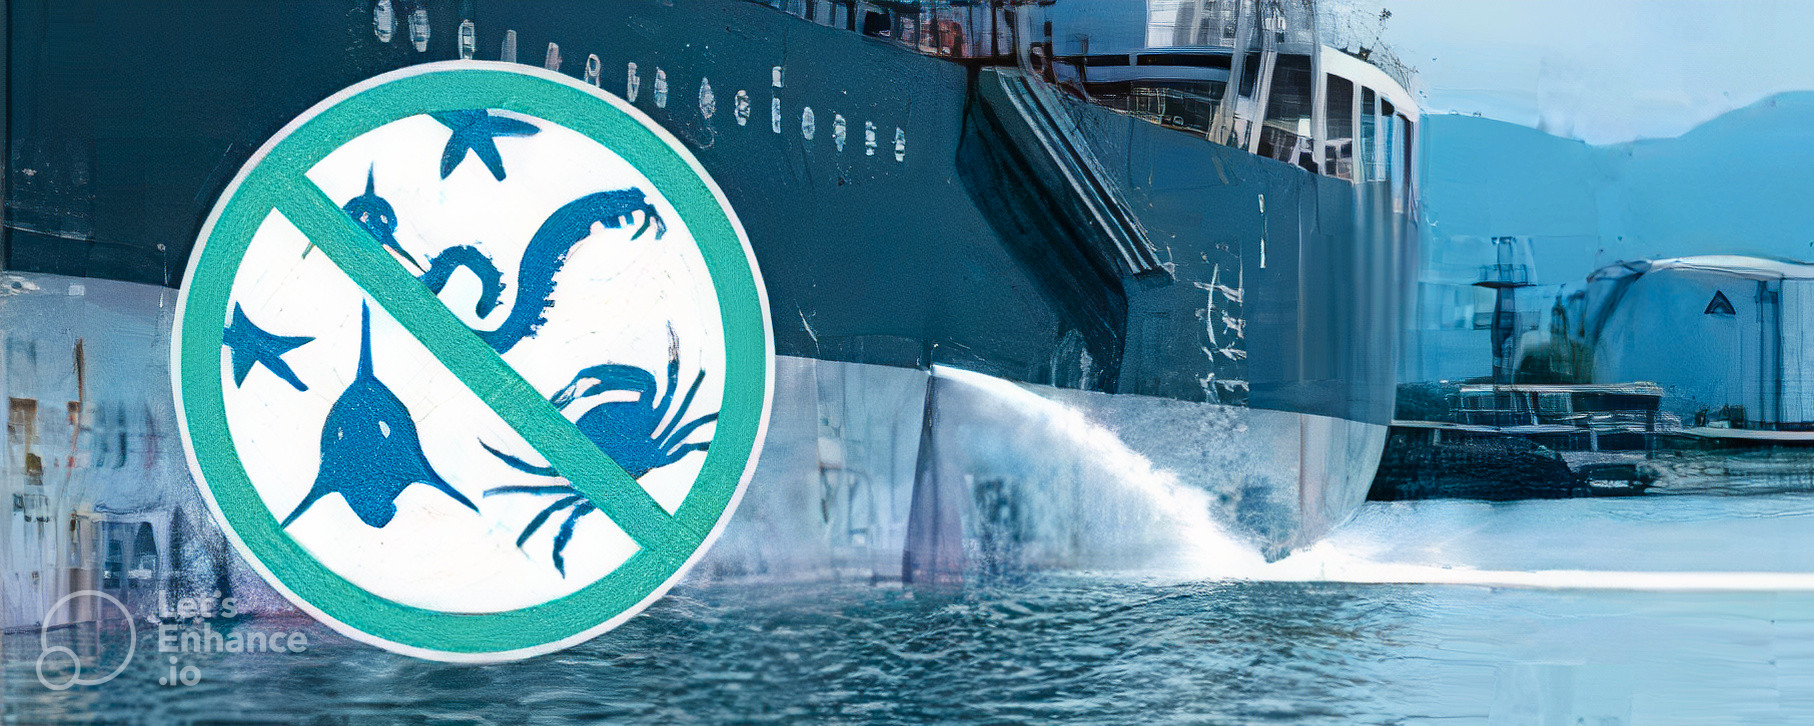 Ballast Water Treatment Systems:  Ensuring Marine Biosecurity